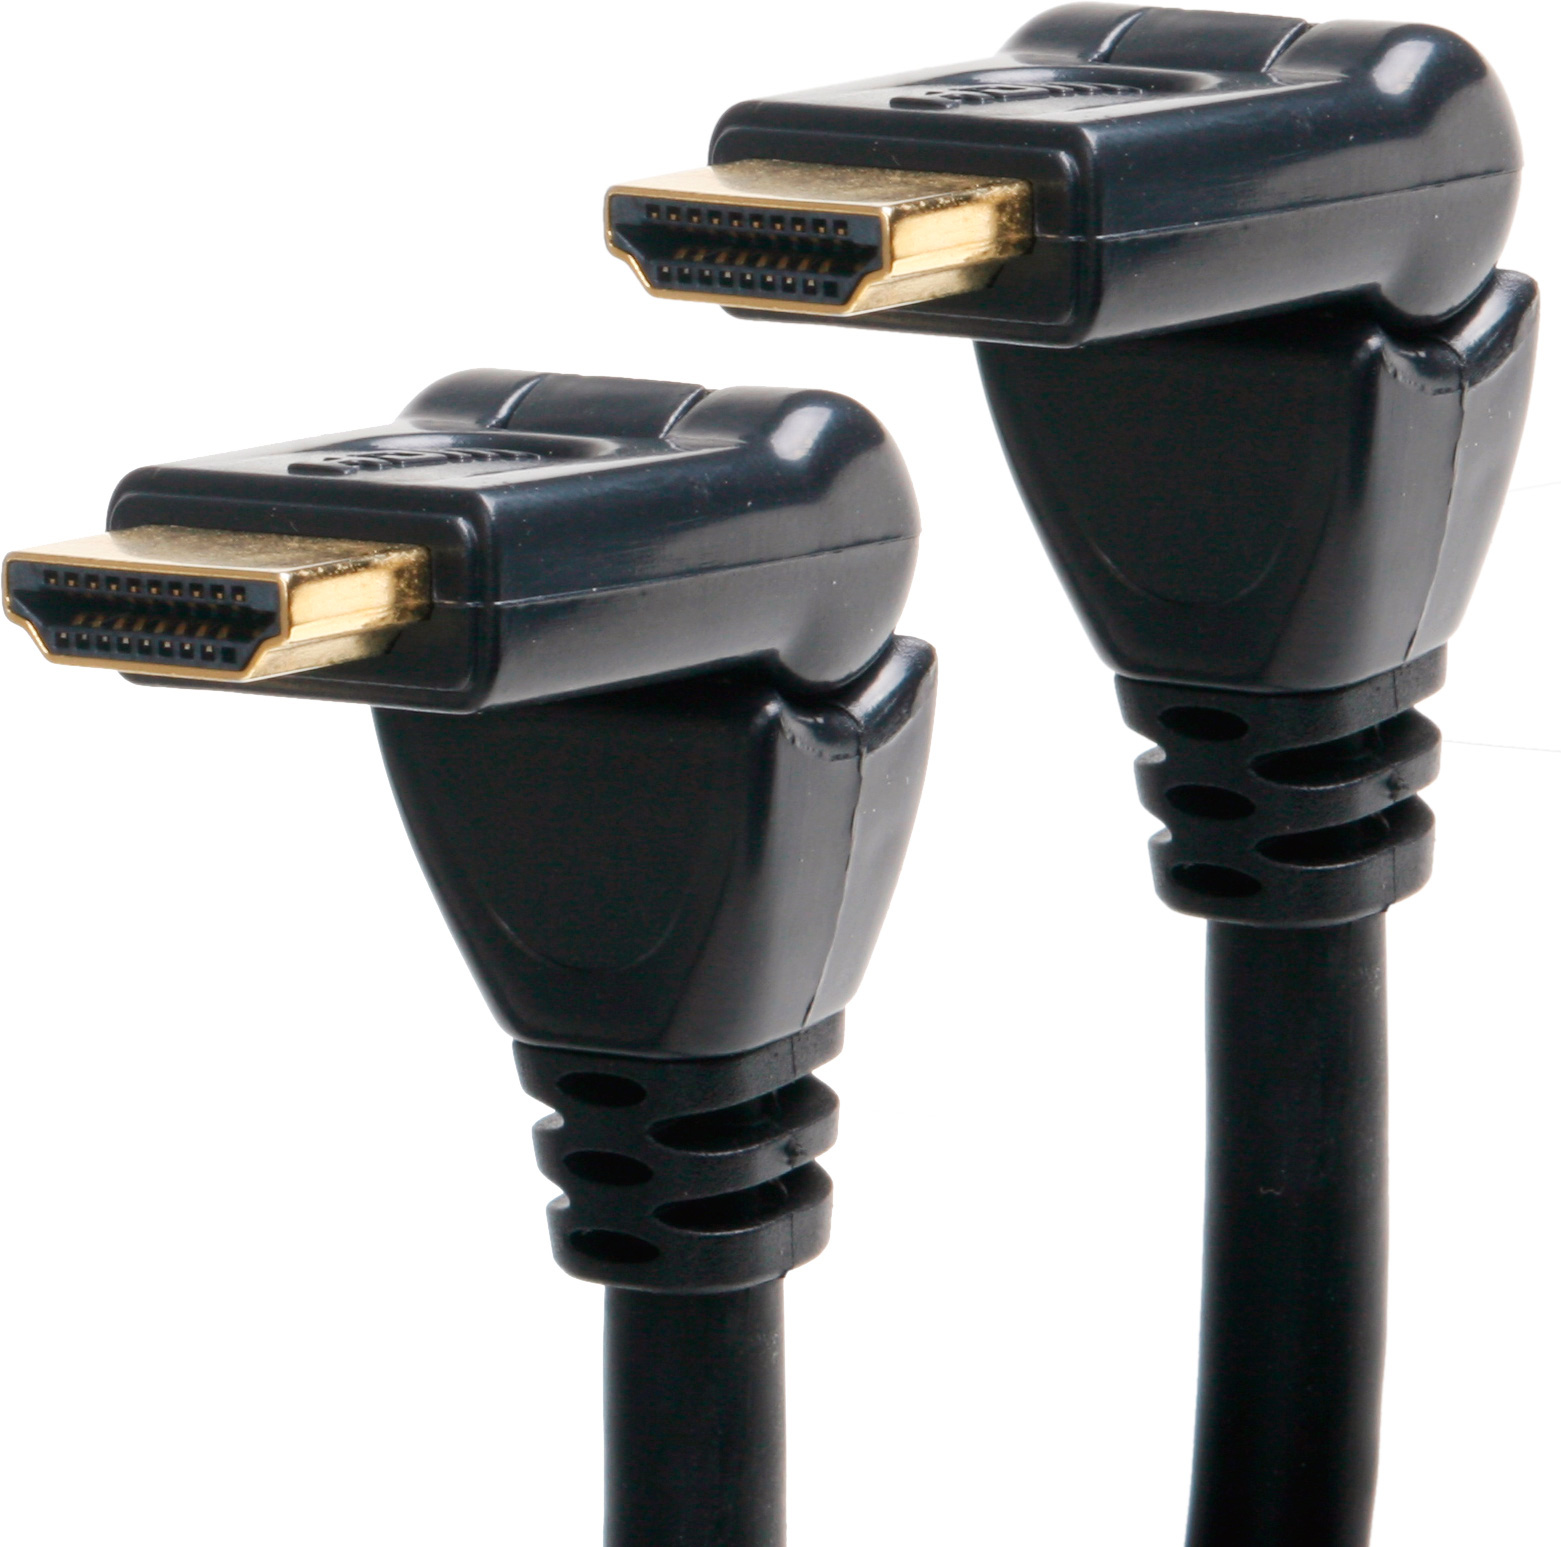 Habitat jam jas Connectronics v1.4 Male to Male HDMI Cable with 180 Degree Swivel Ends 6  Foot